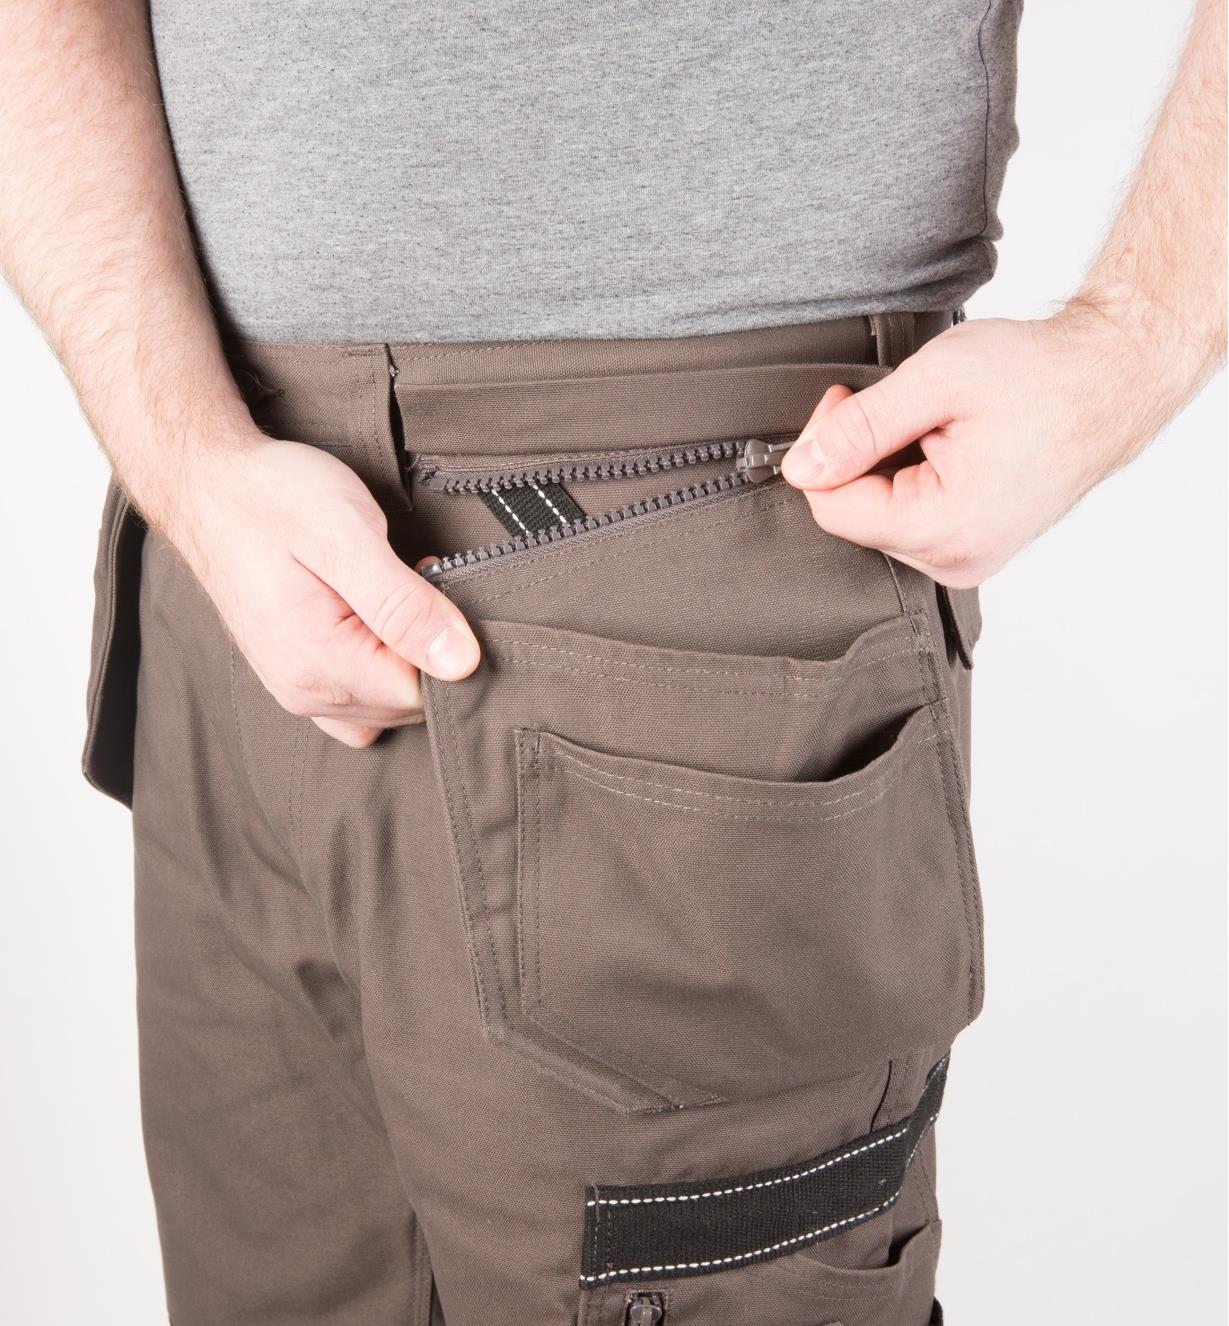 A man wearing gray work pants unzips one of the side pouches